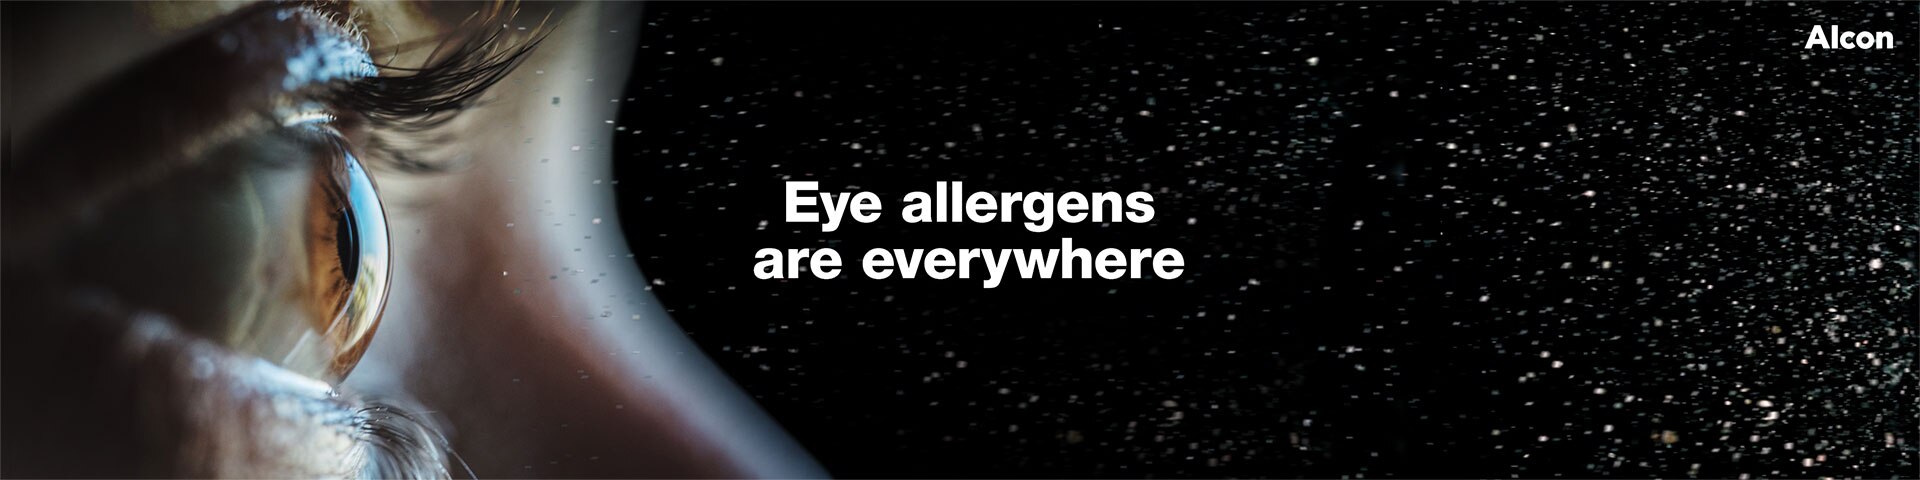 Eye allergens are everywhere. Close up shot of a person's eye.